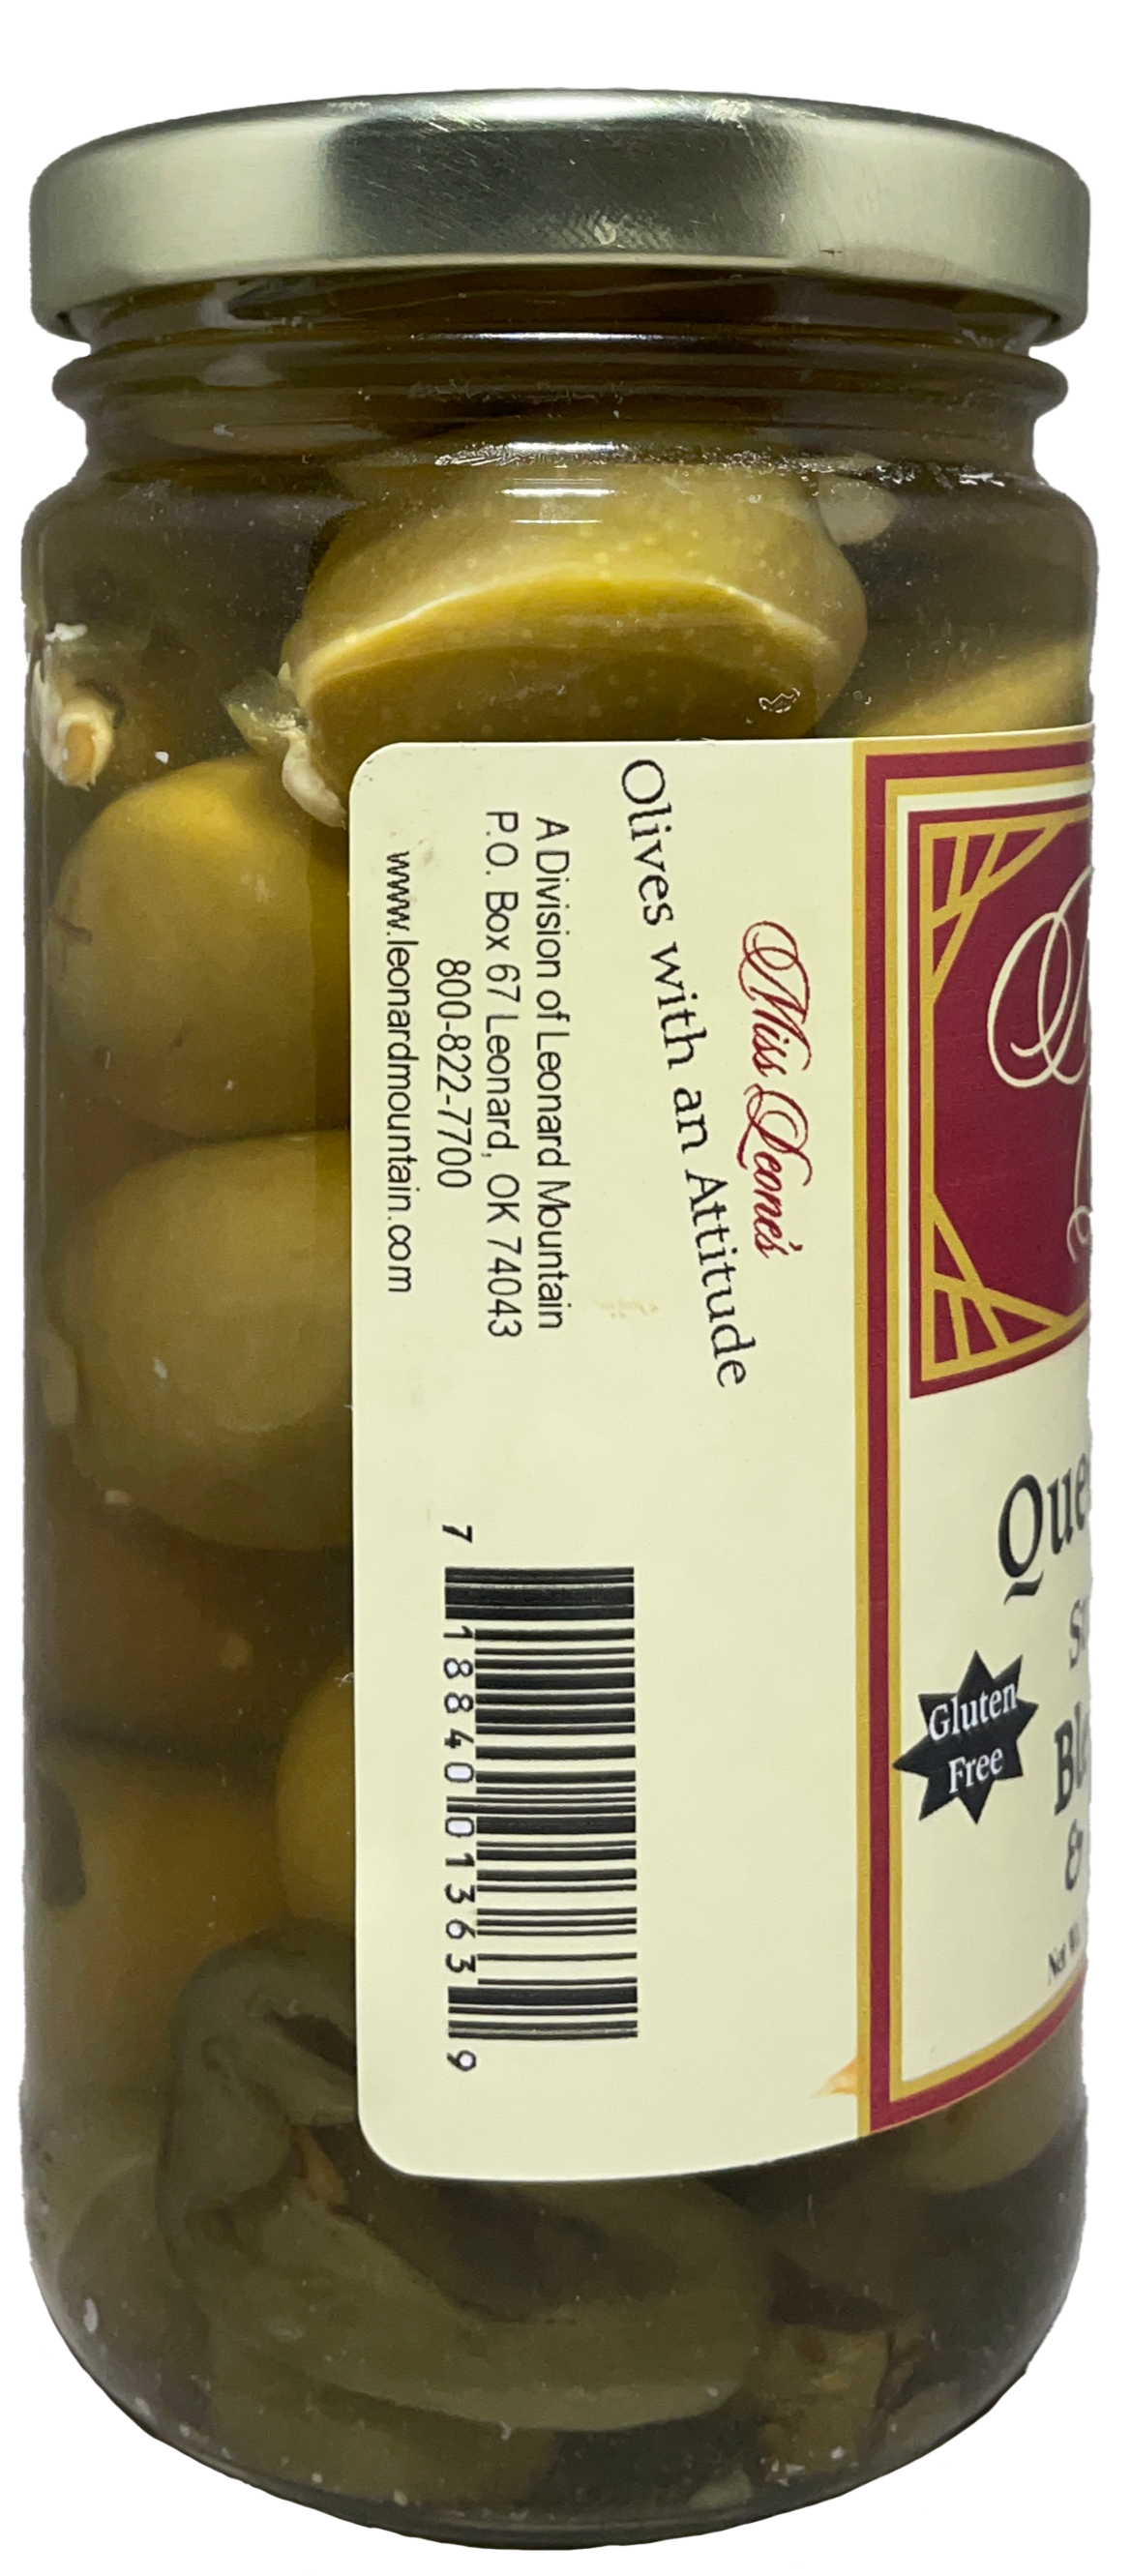 Bleu Cheese & Jalapeno Double Stuffed Queen Olives *NEW LOWER PRICE*